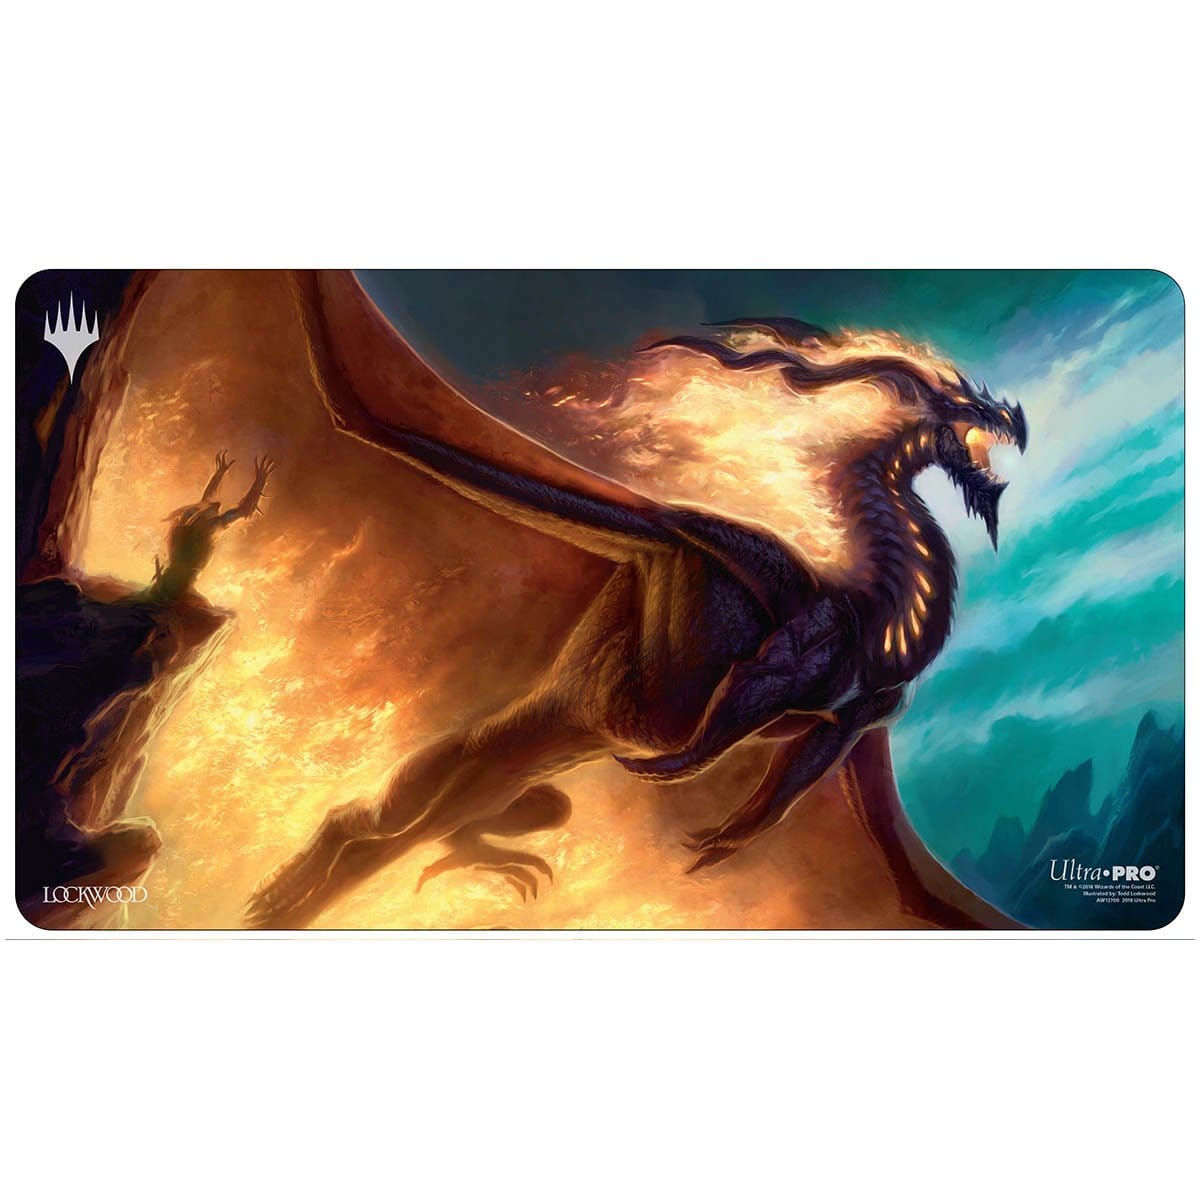 Prossh, Skyraider of Kher Playmat - Playmat - Original Magic Art - Accessories for Magic the Gathering and other card games